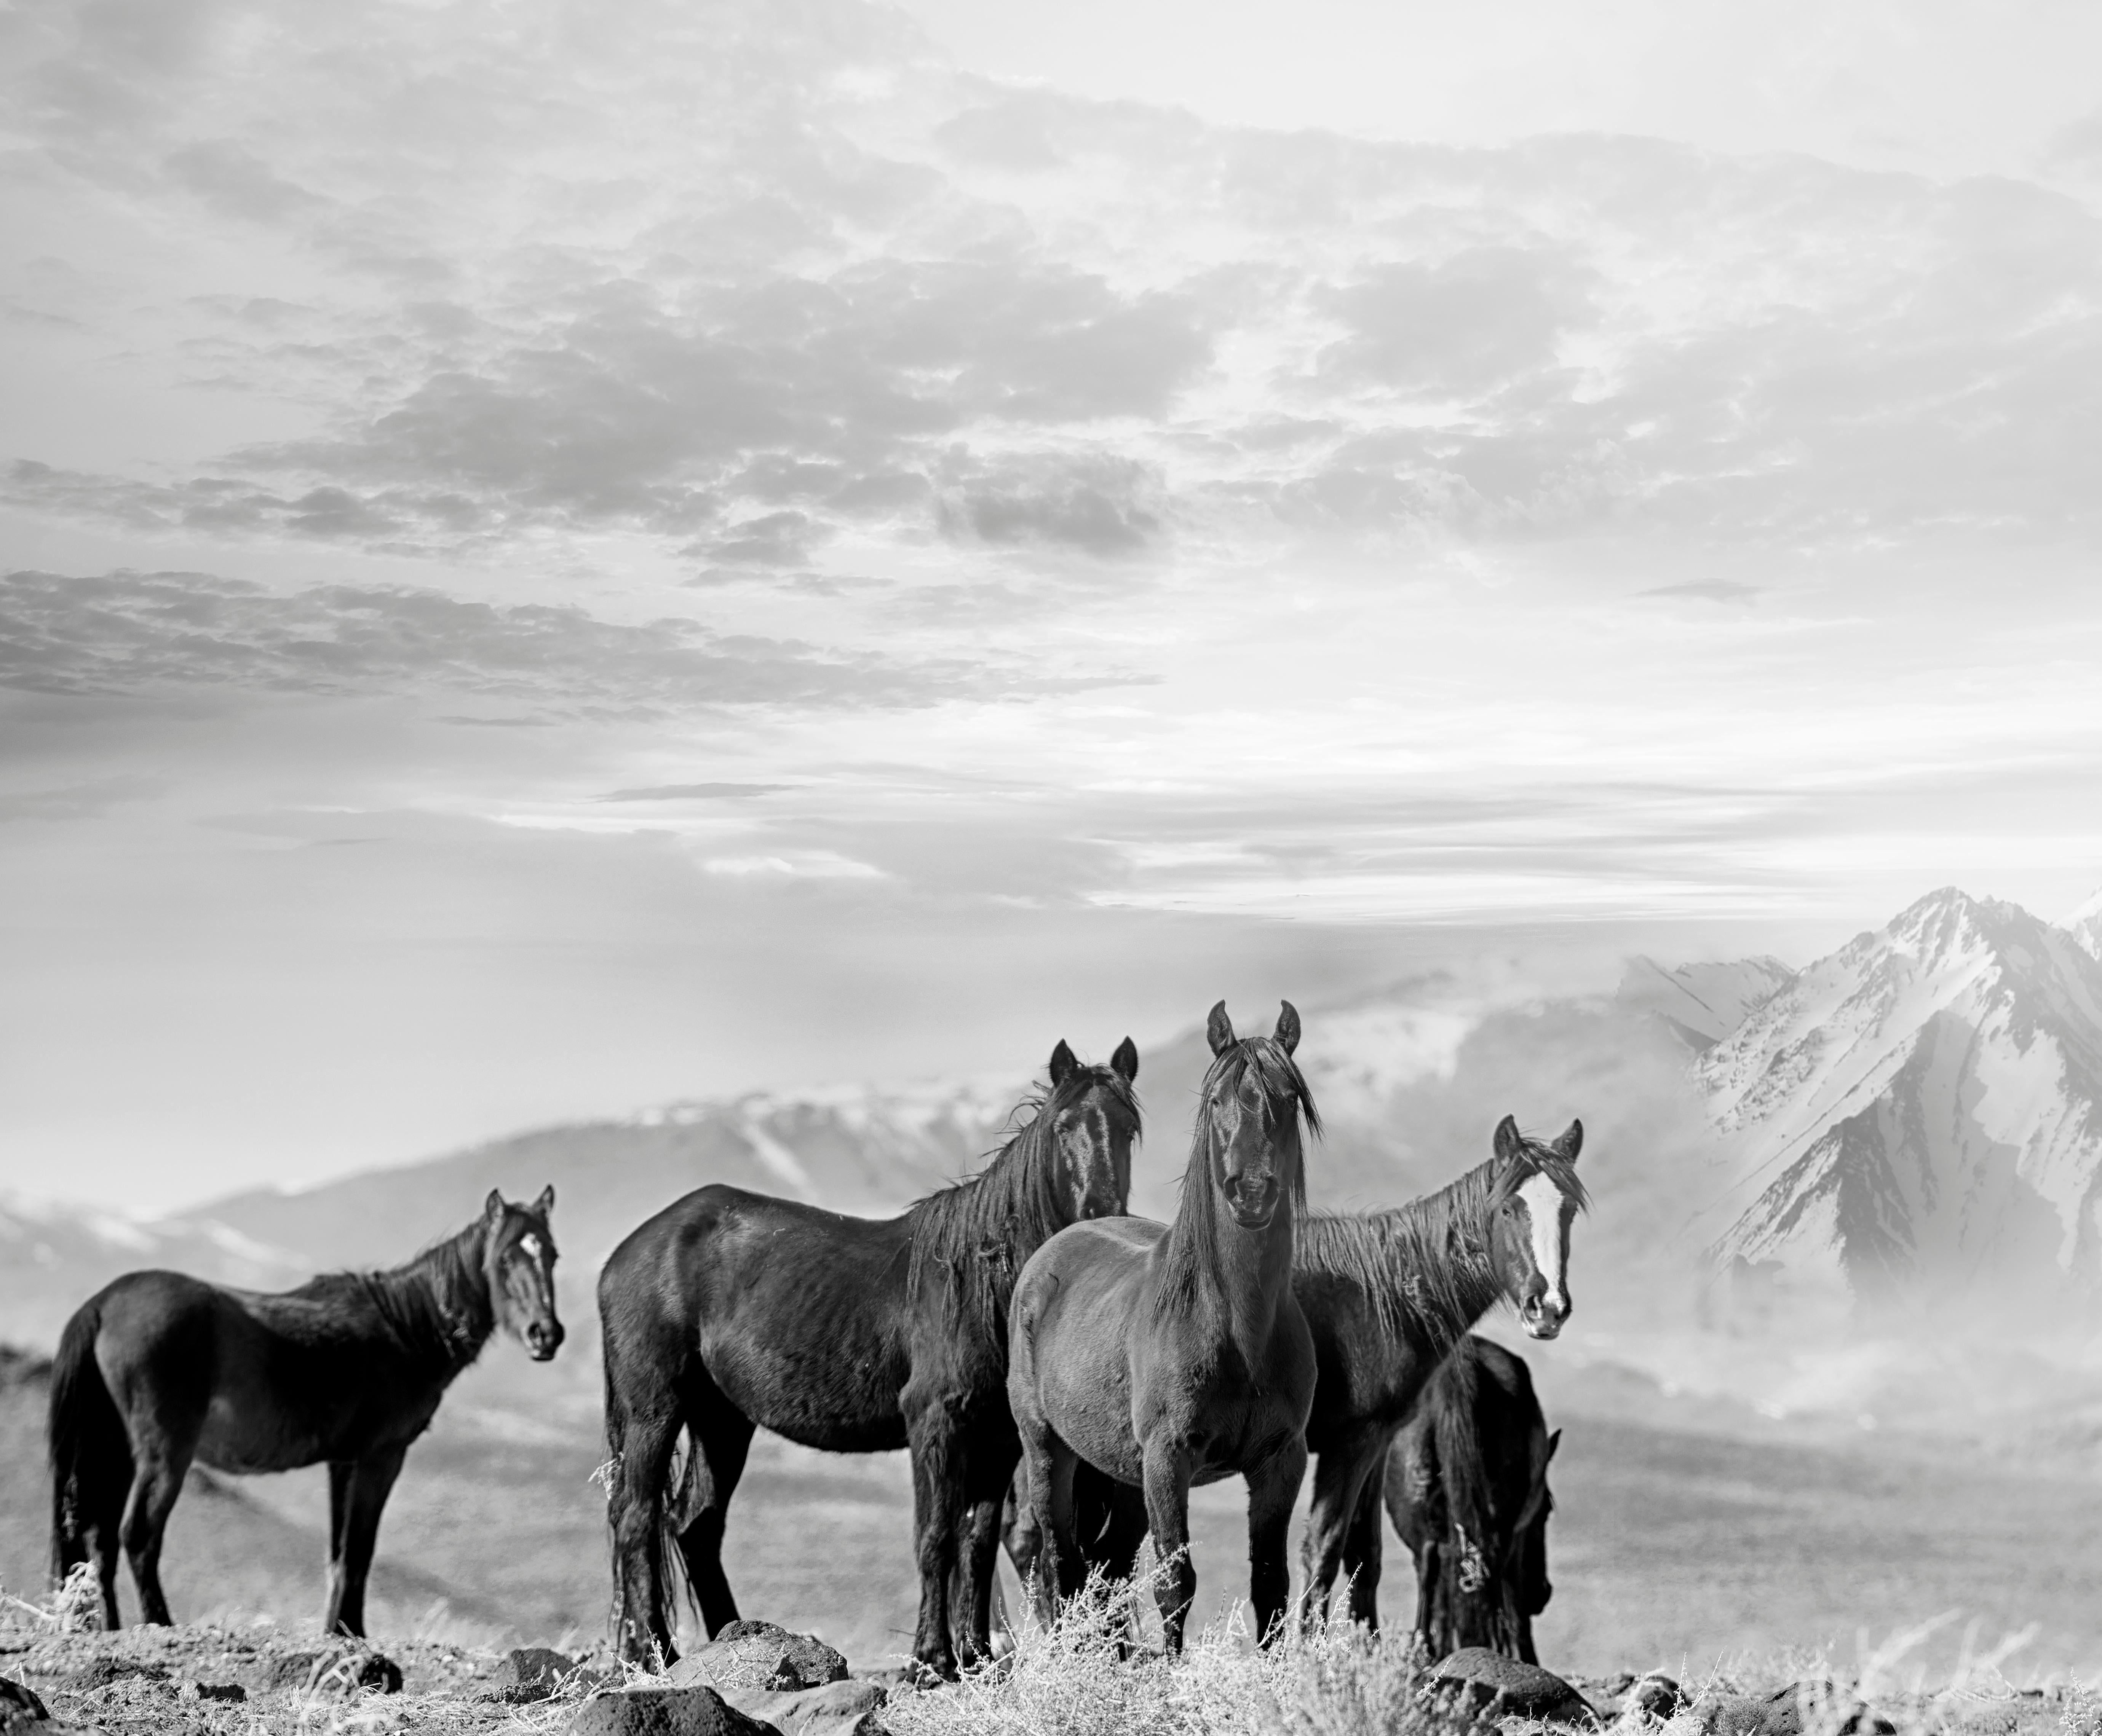 Shane Russeck Animal Print - High Sierra Mustangs - 40x60 Black and White Photography of Wild Horses